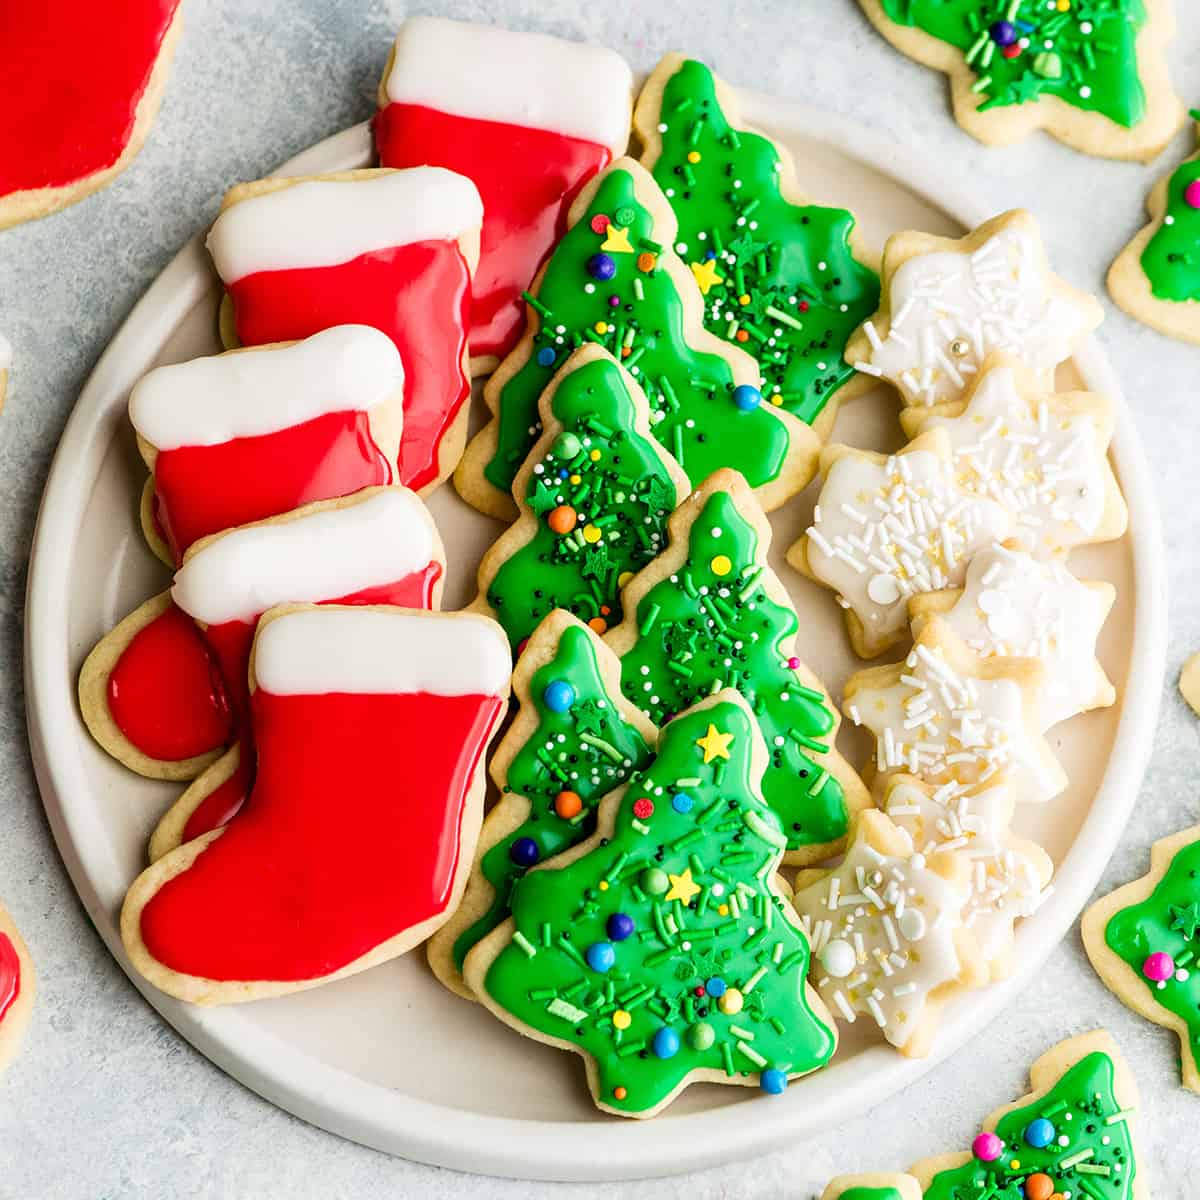 a plate of best christmas cookie recipes - cut out sugar cookies